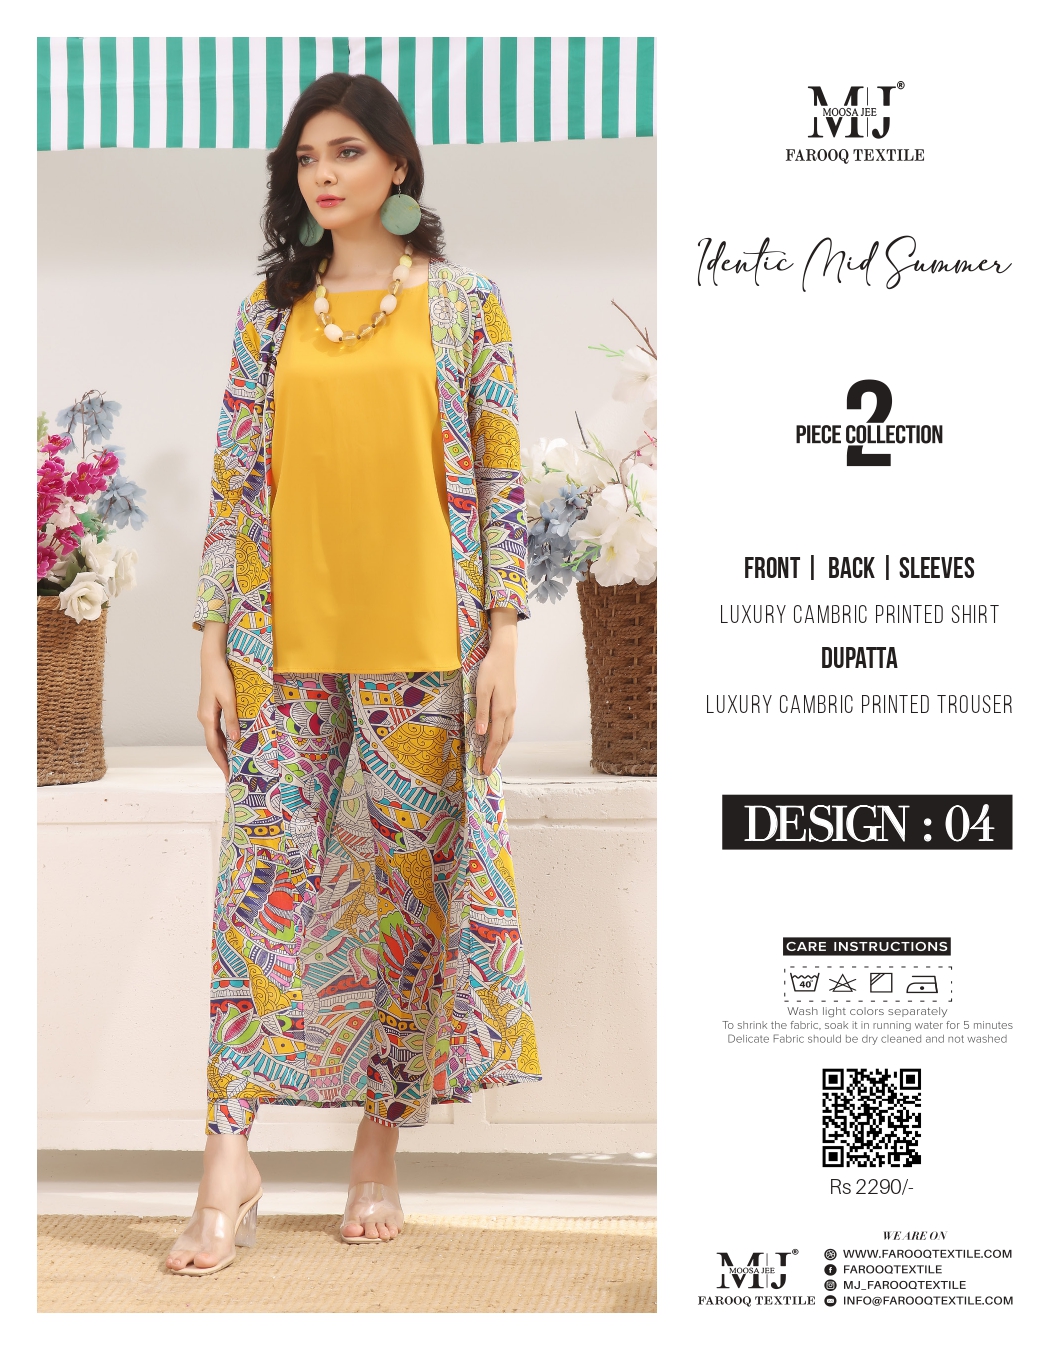 MJ 2pc Inlys by Farooq textile_page-0004